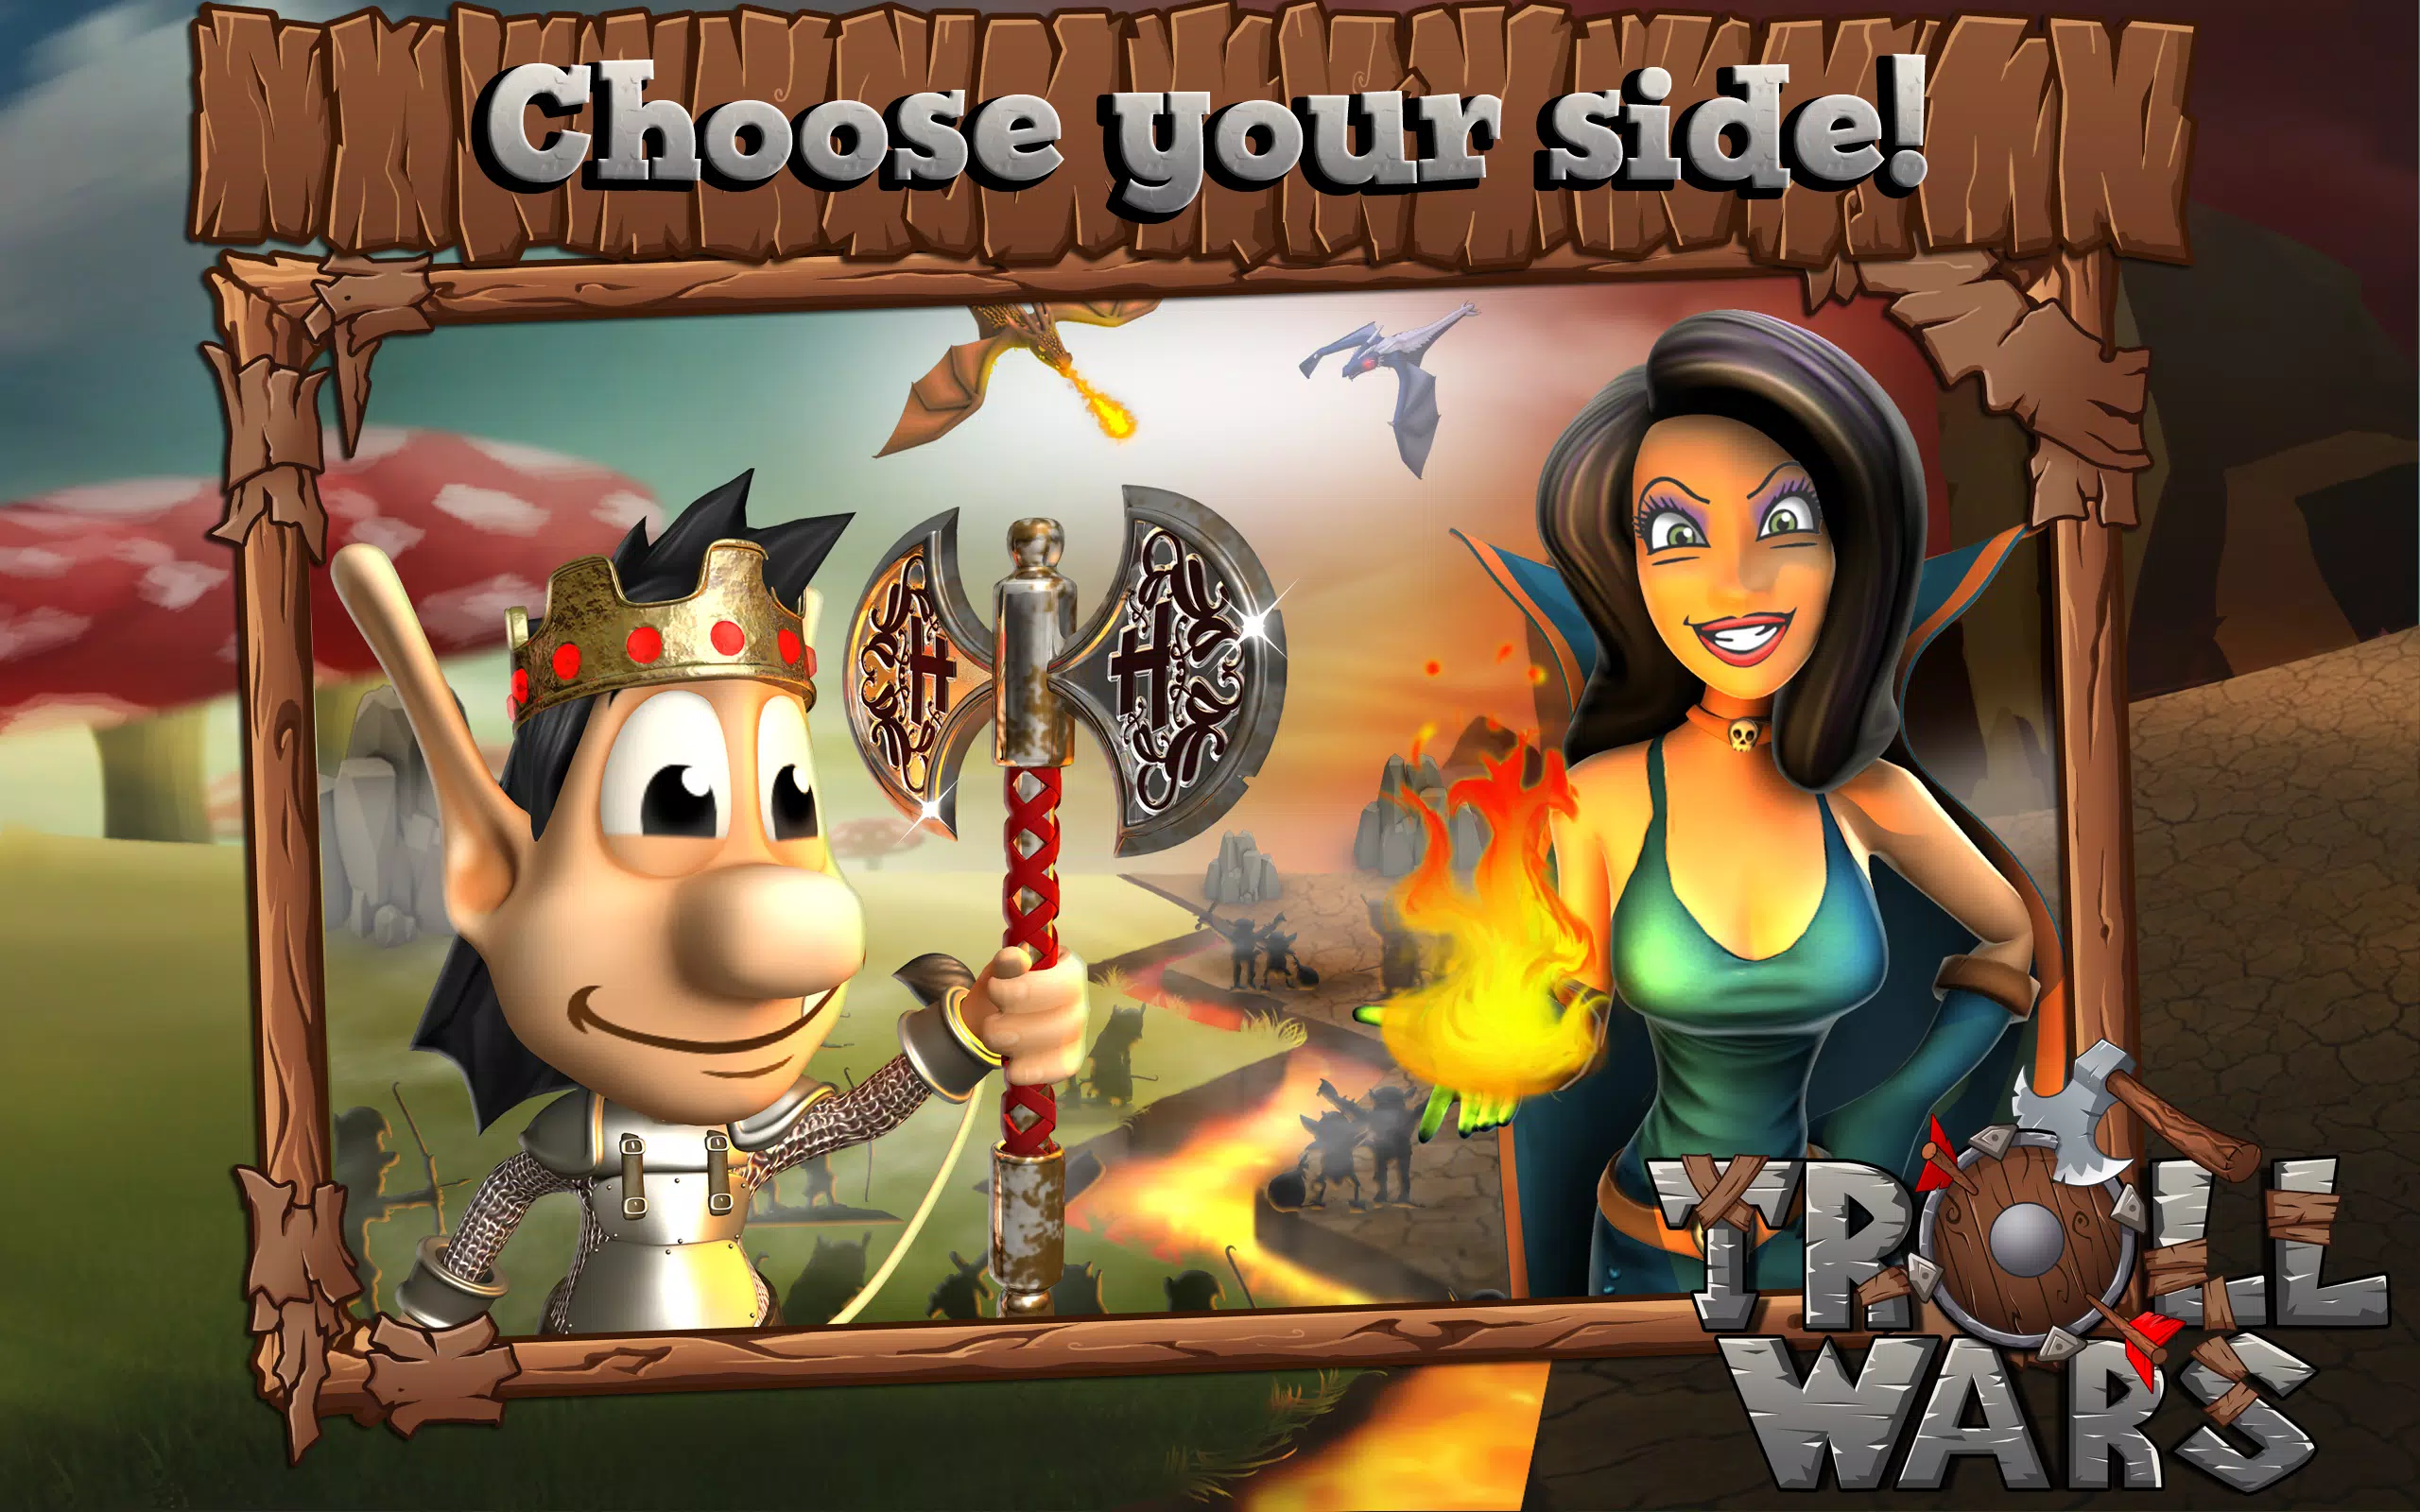 Hugo Troll Wars for Android - APK Download